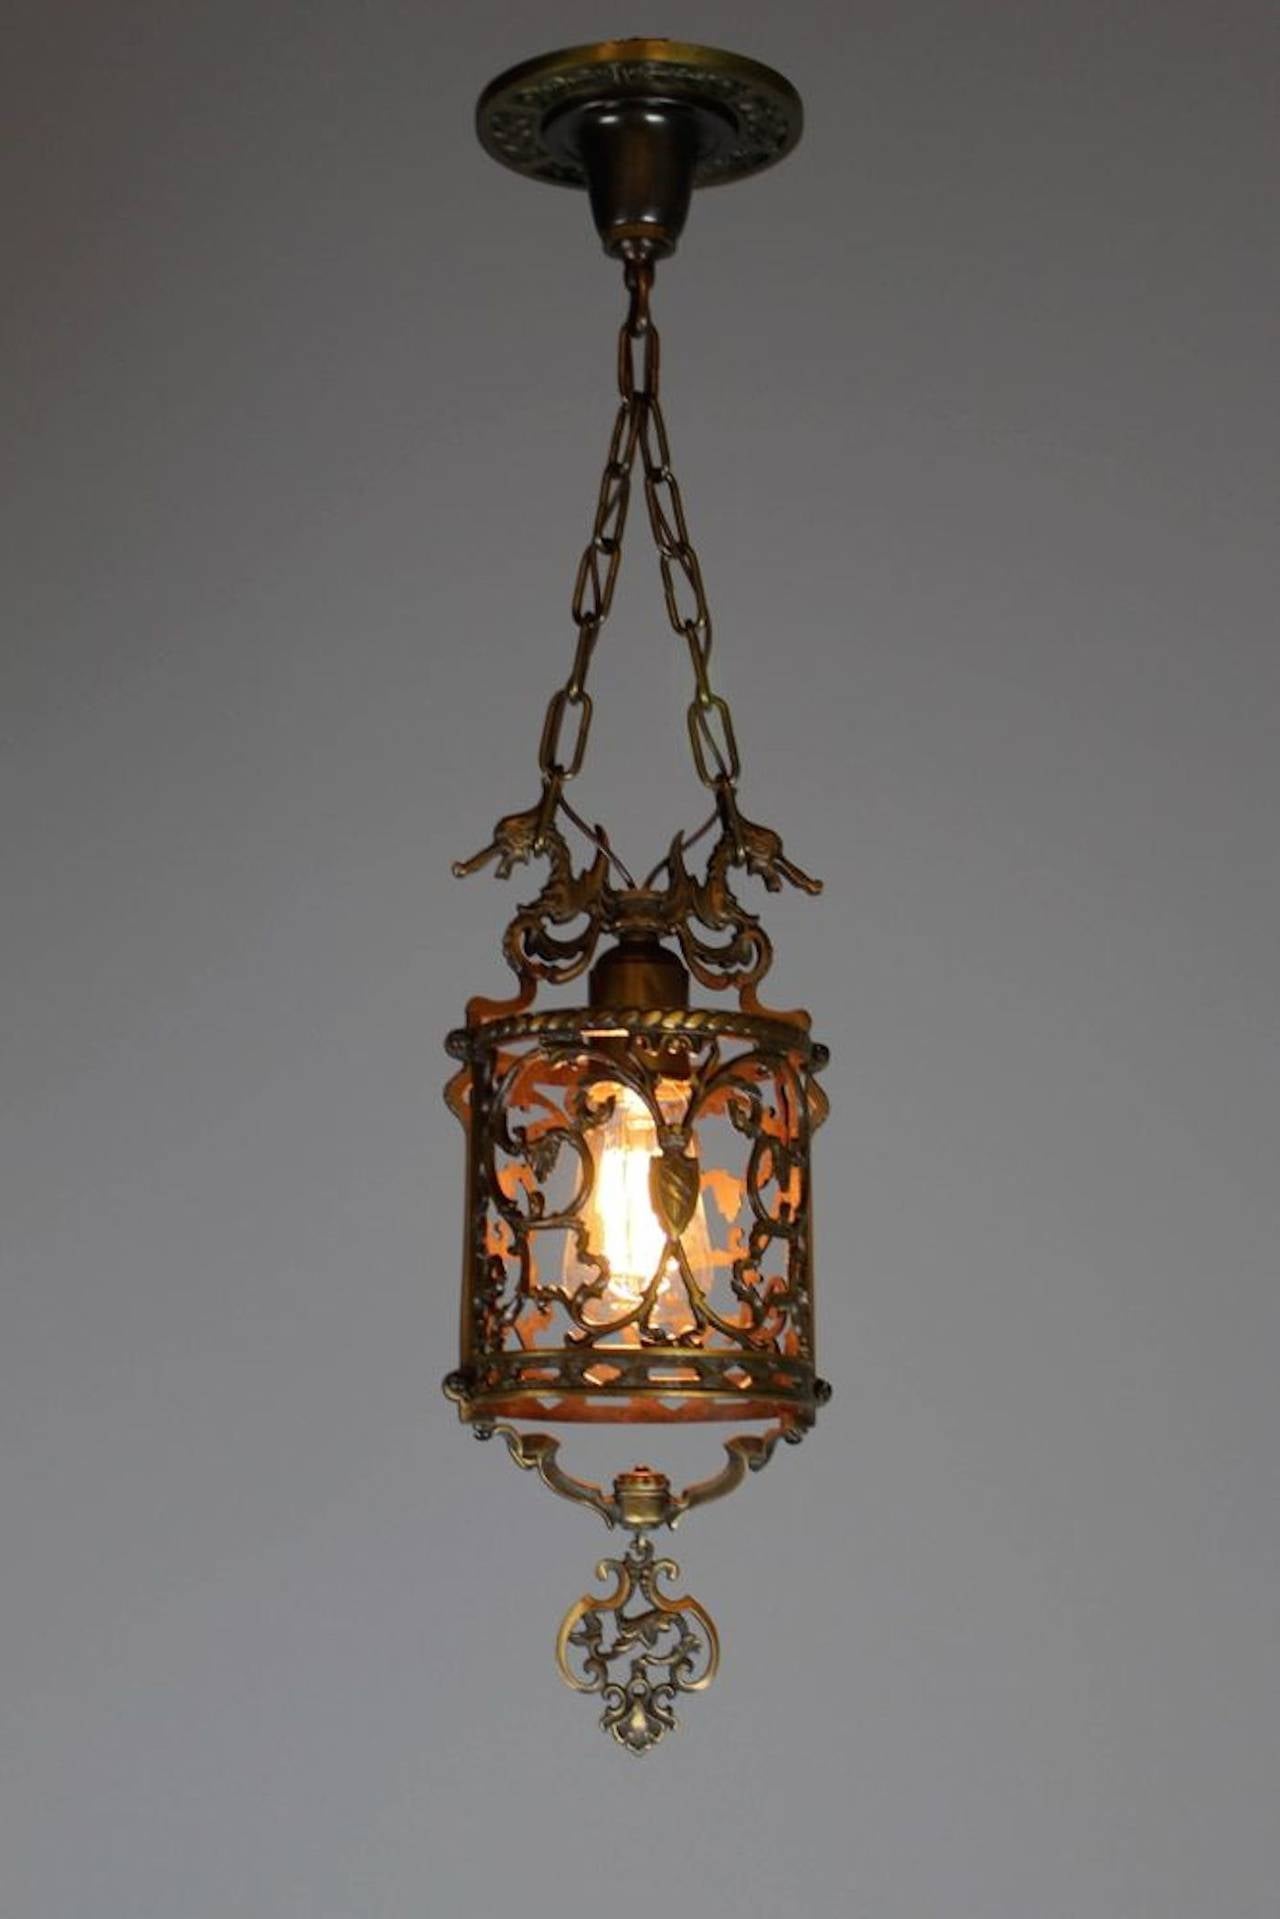 Spanish Colonial Spanish Style Colonial Revival Bronze Sea Horse Hall Lantern